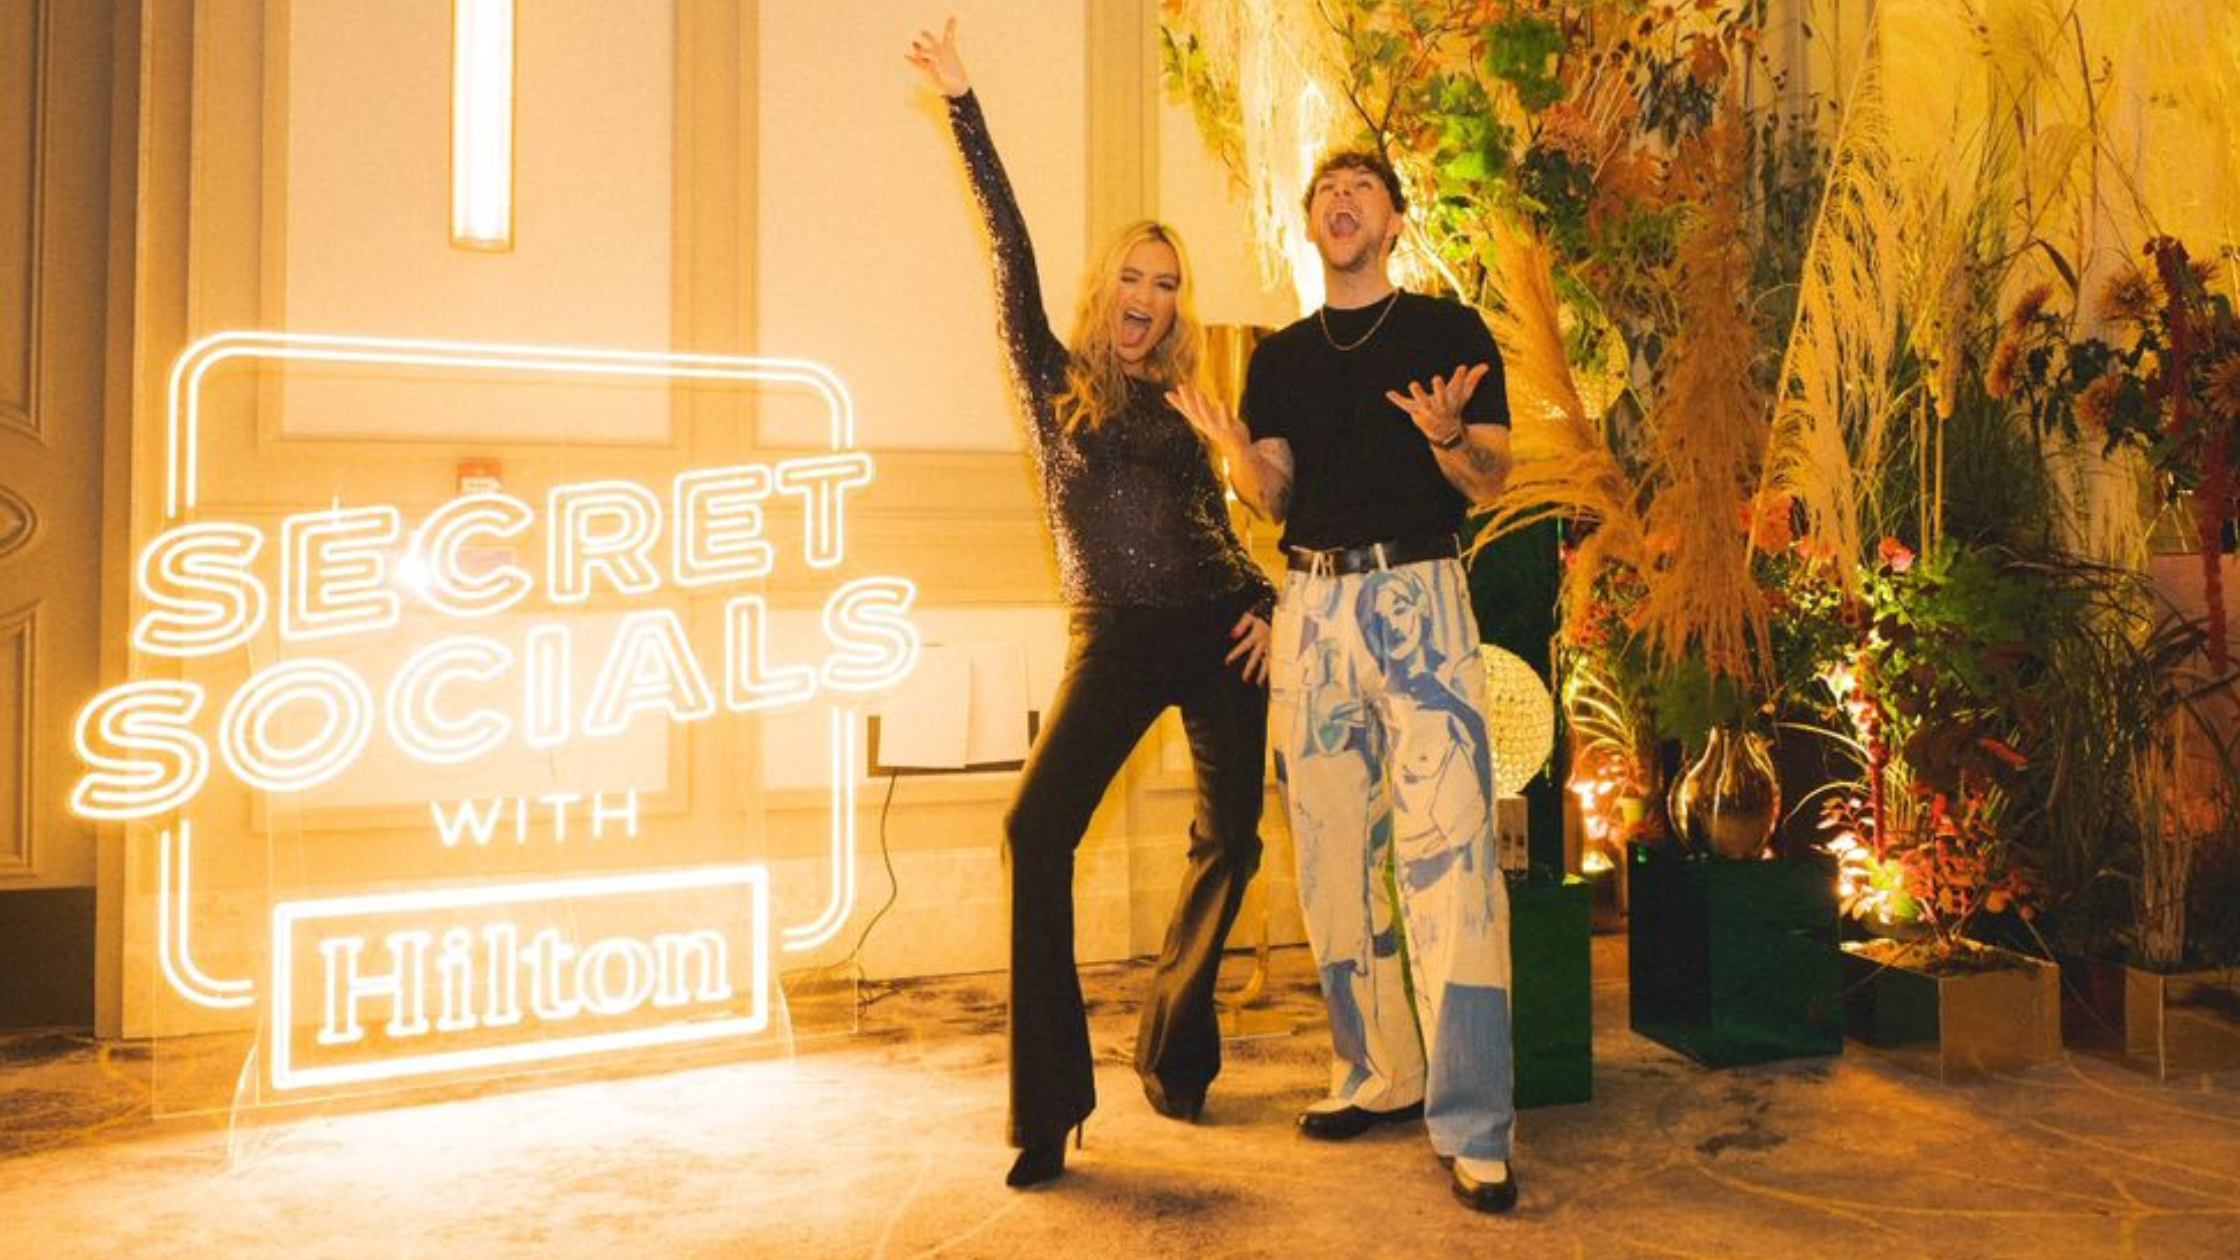 Hilton Secret Socials neon logo sign with Laura Whitmore and Tom Grennan.